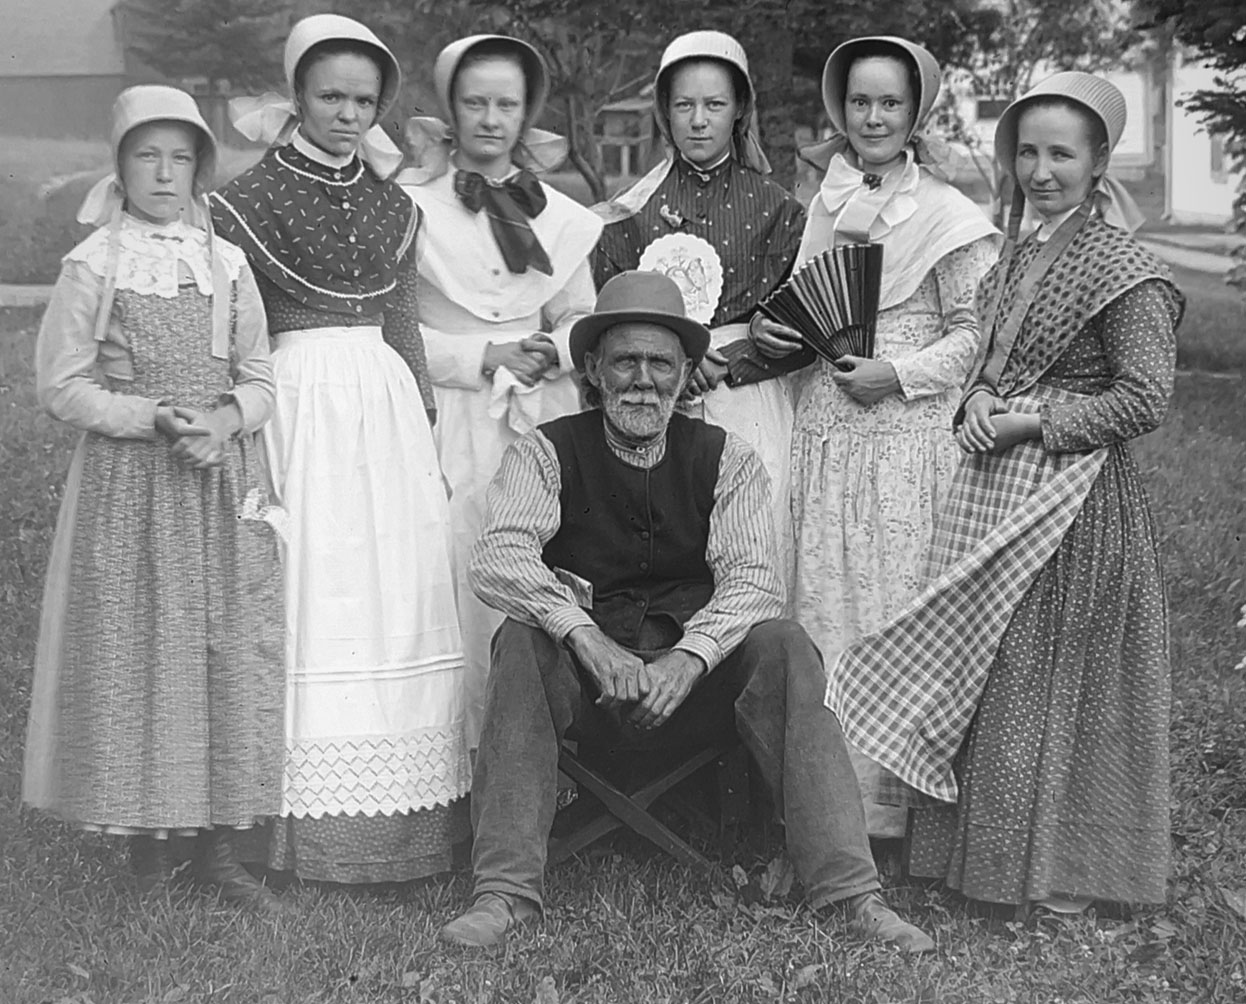 A black and white image of Shaker women and one non shaker man